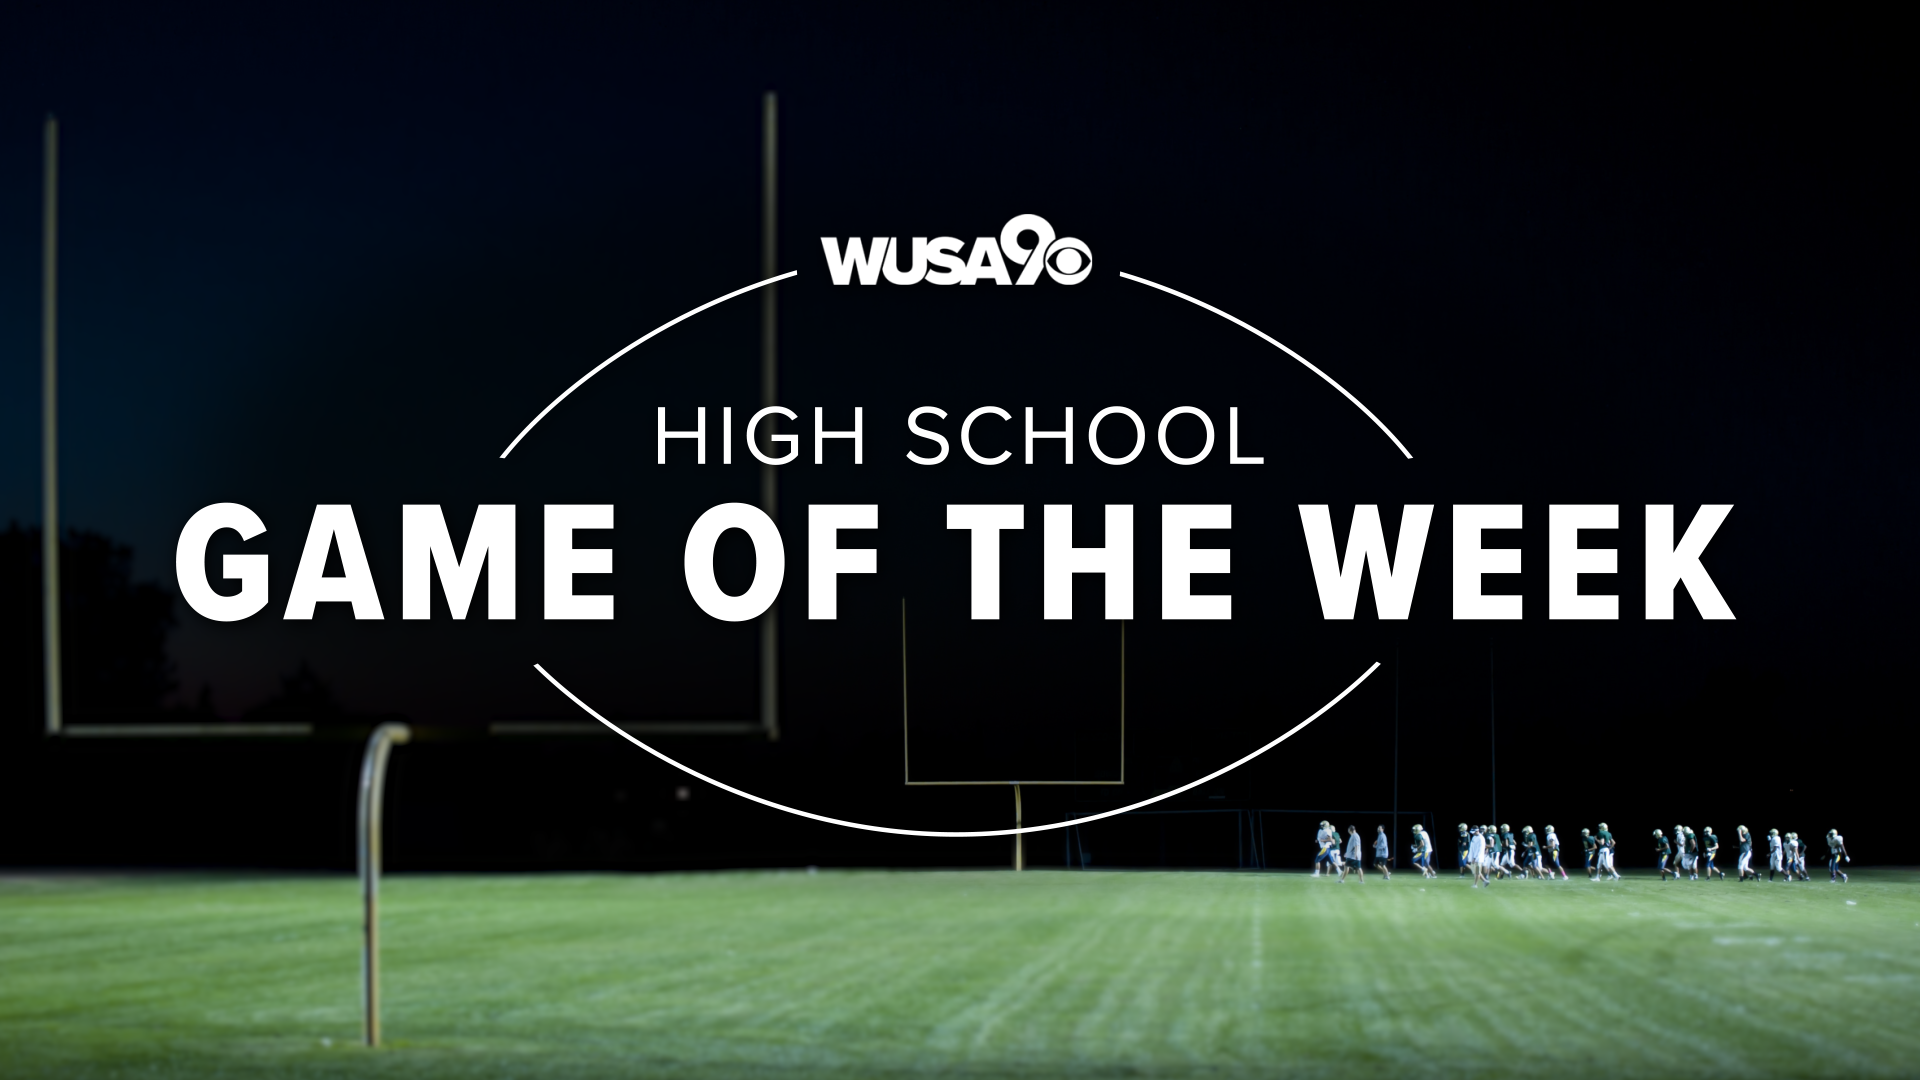 Charles H. Flowers High School takes on Eleanor Roosevelt High School in WUSA9's game of the week Friday in Greenbelt, Maryland.